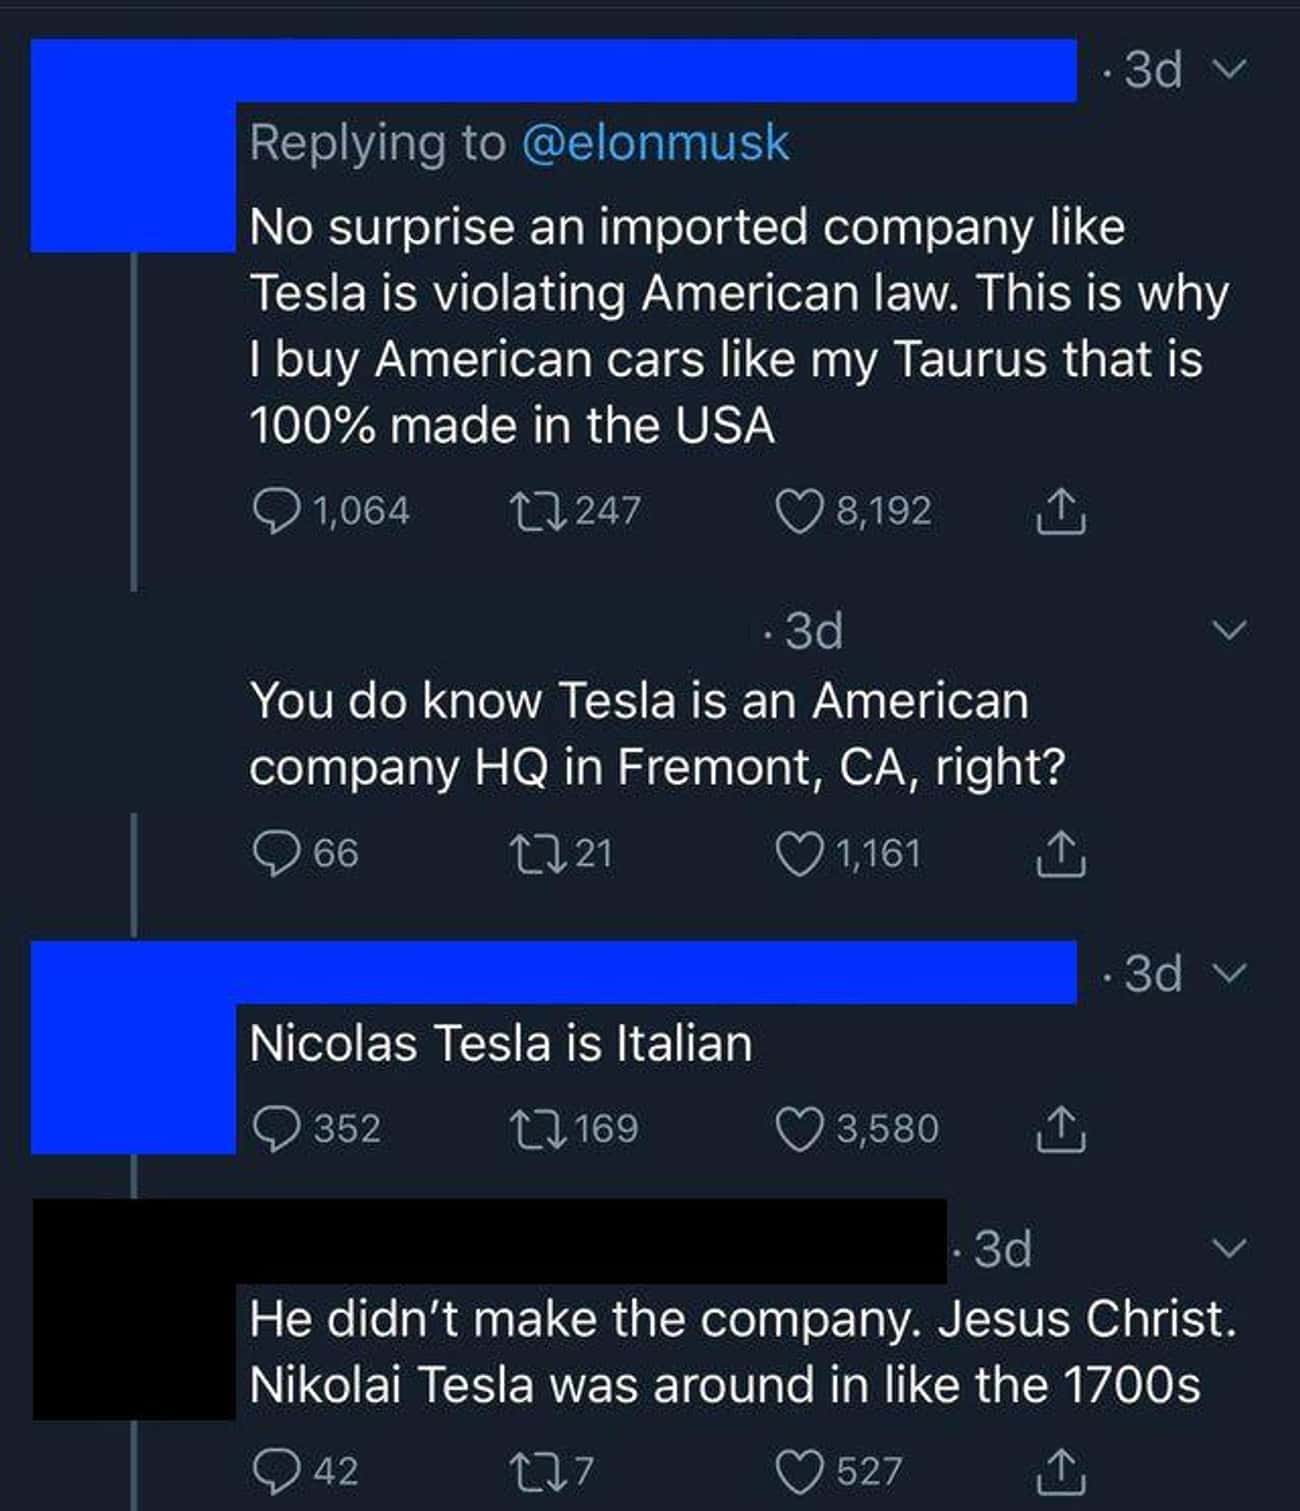 Confidently Wrong About Tesla's Origin